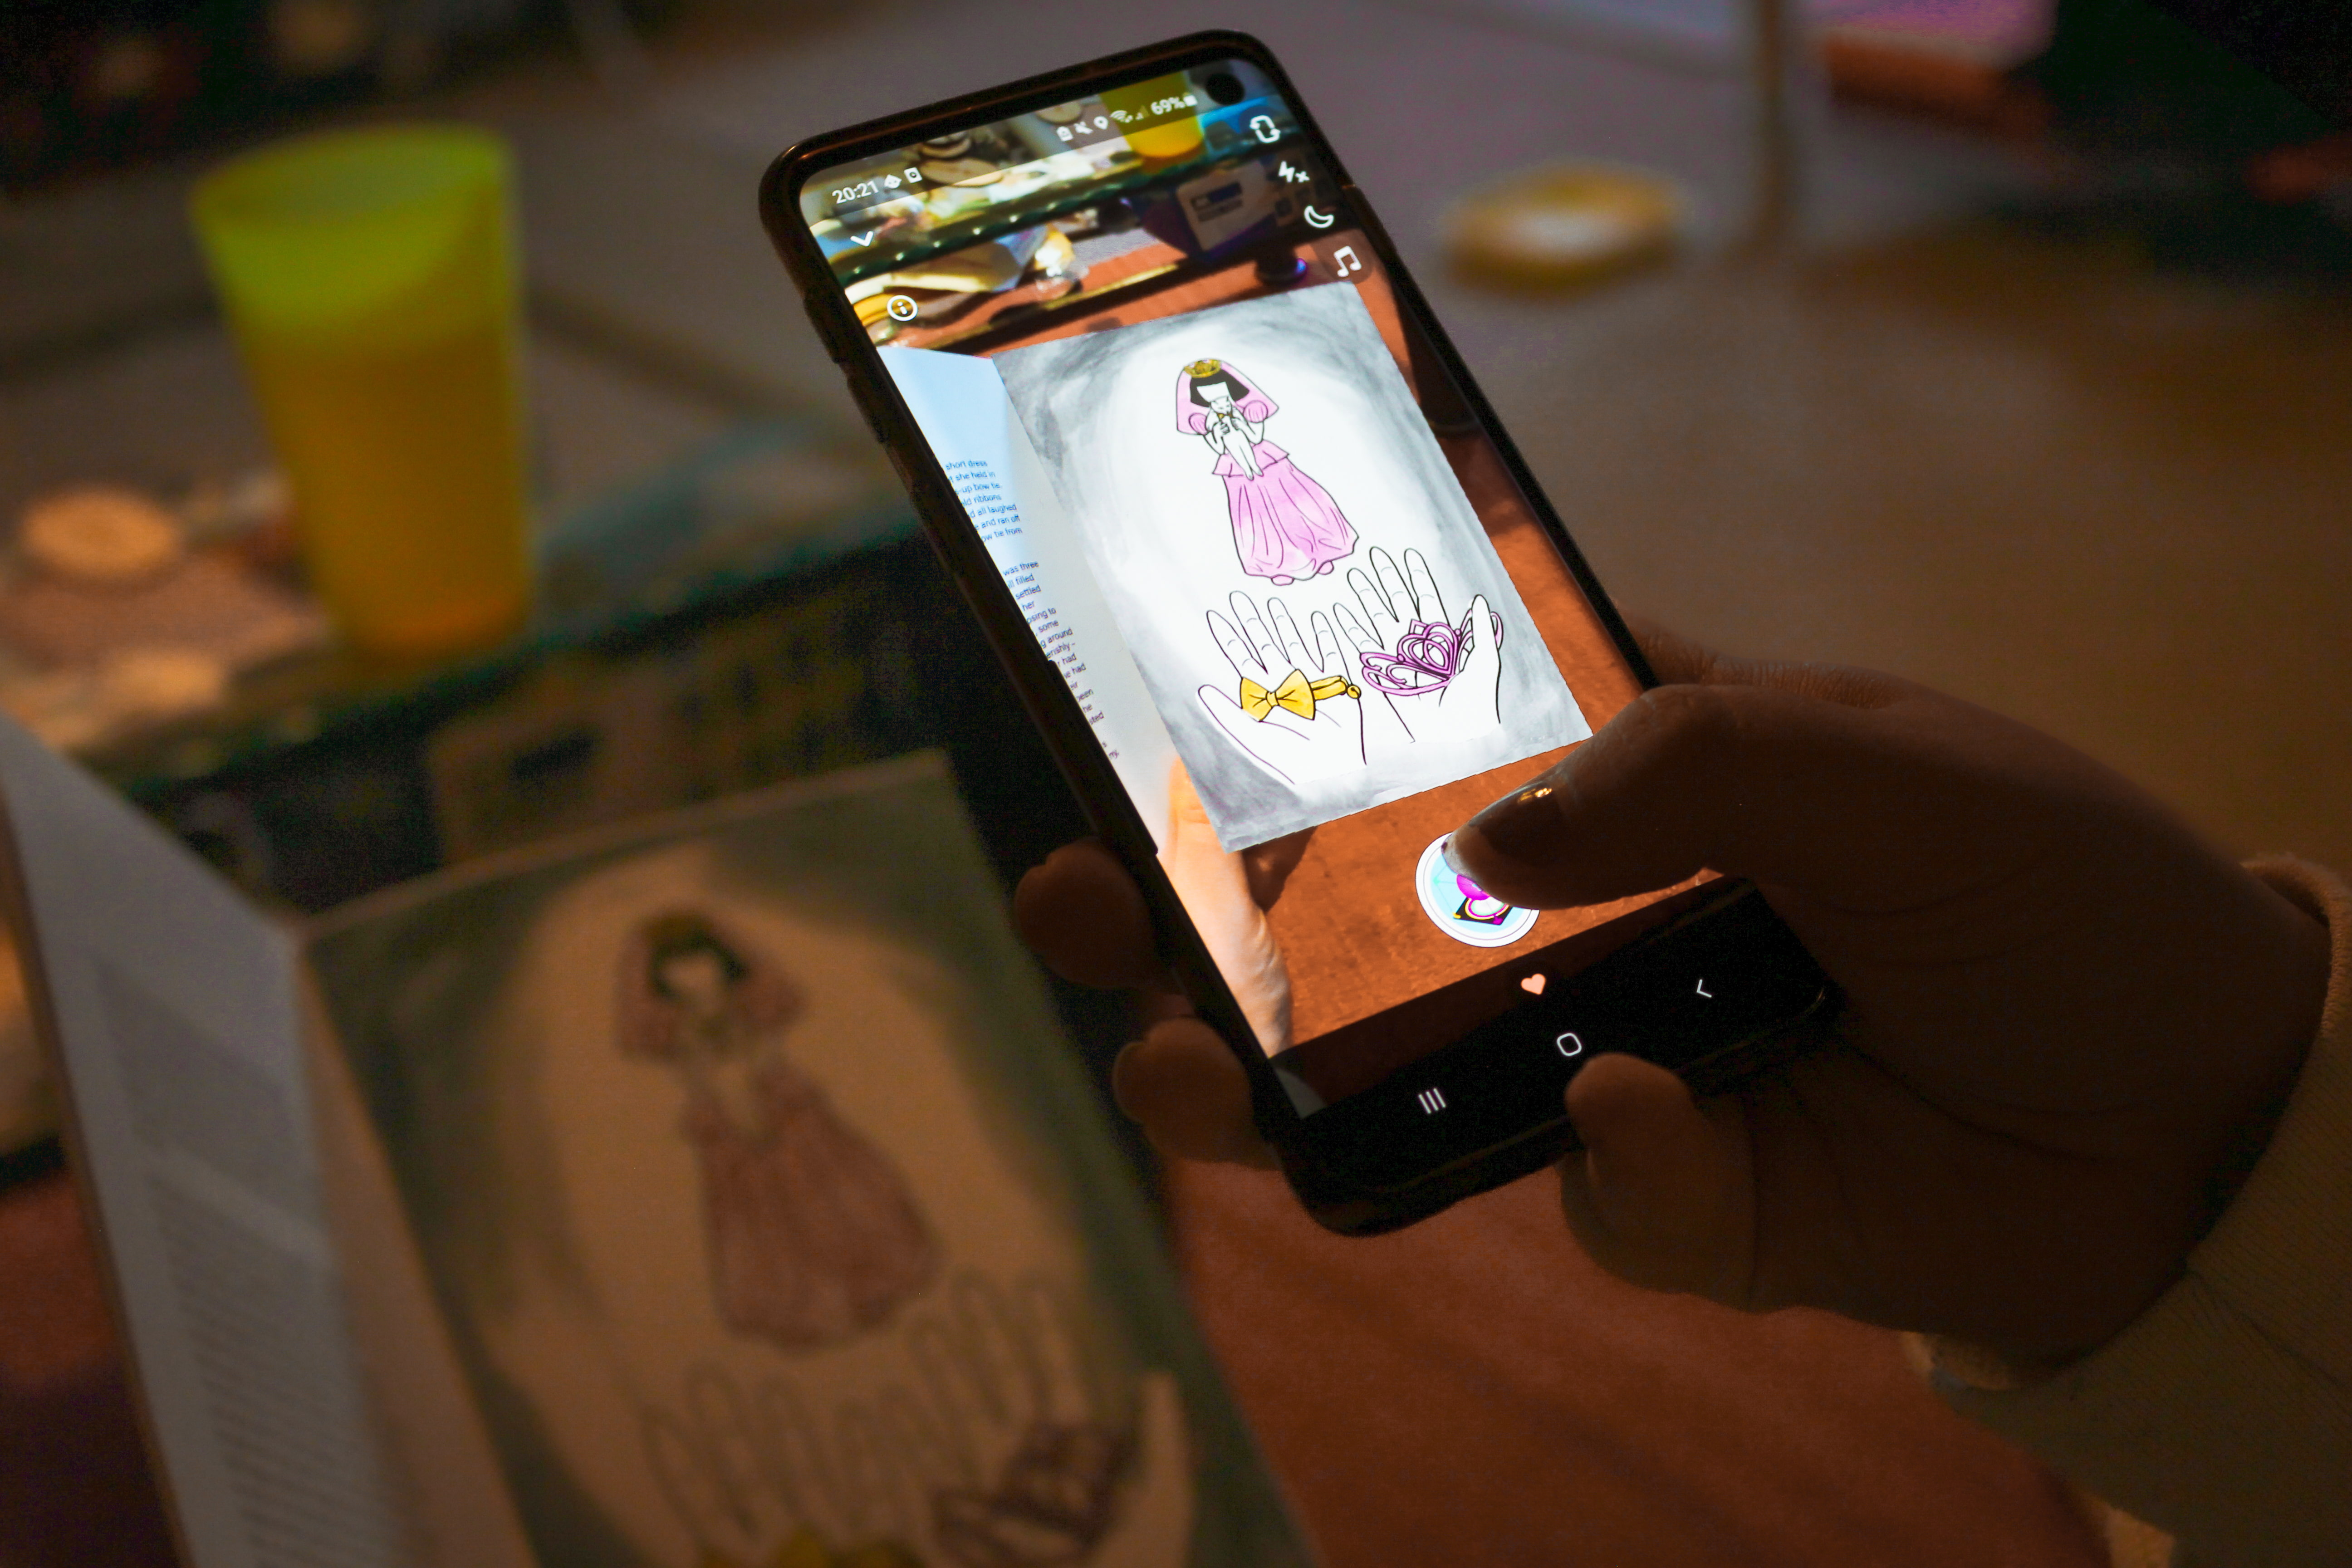 Photograph of a phone scanning an inside page of the zine to show an animated version of the page giving the viewer the visual movement of the image.